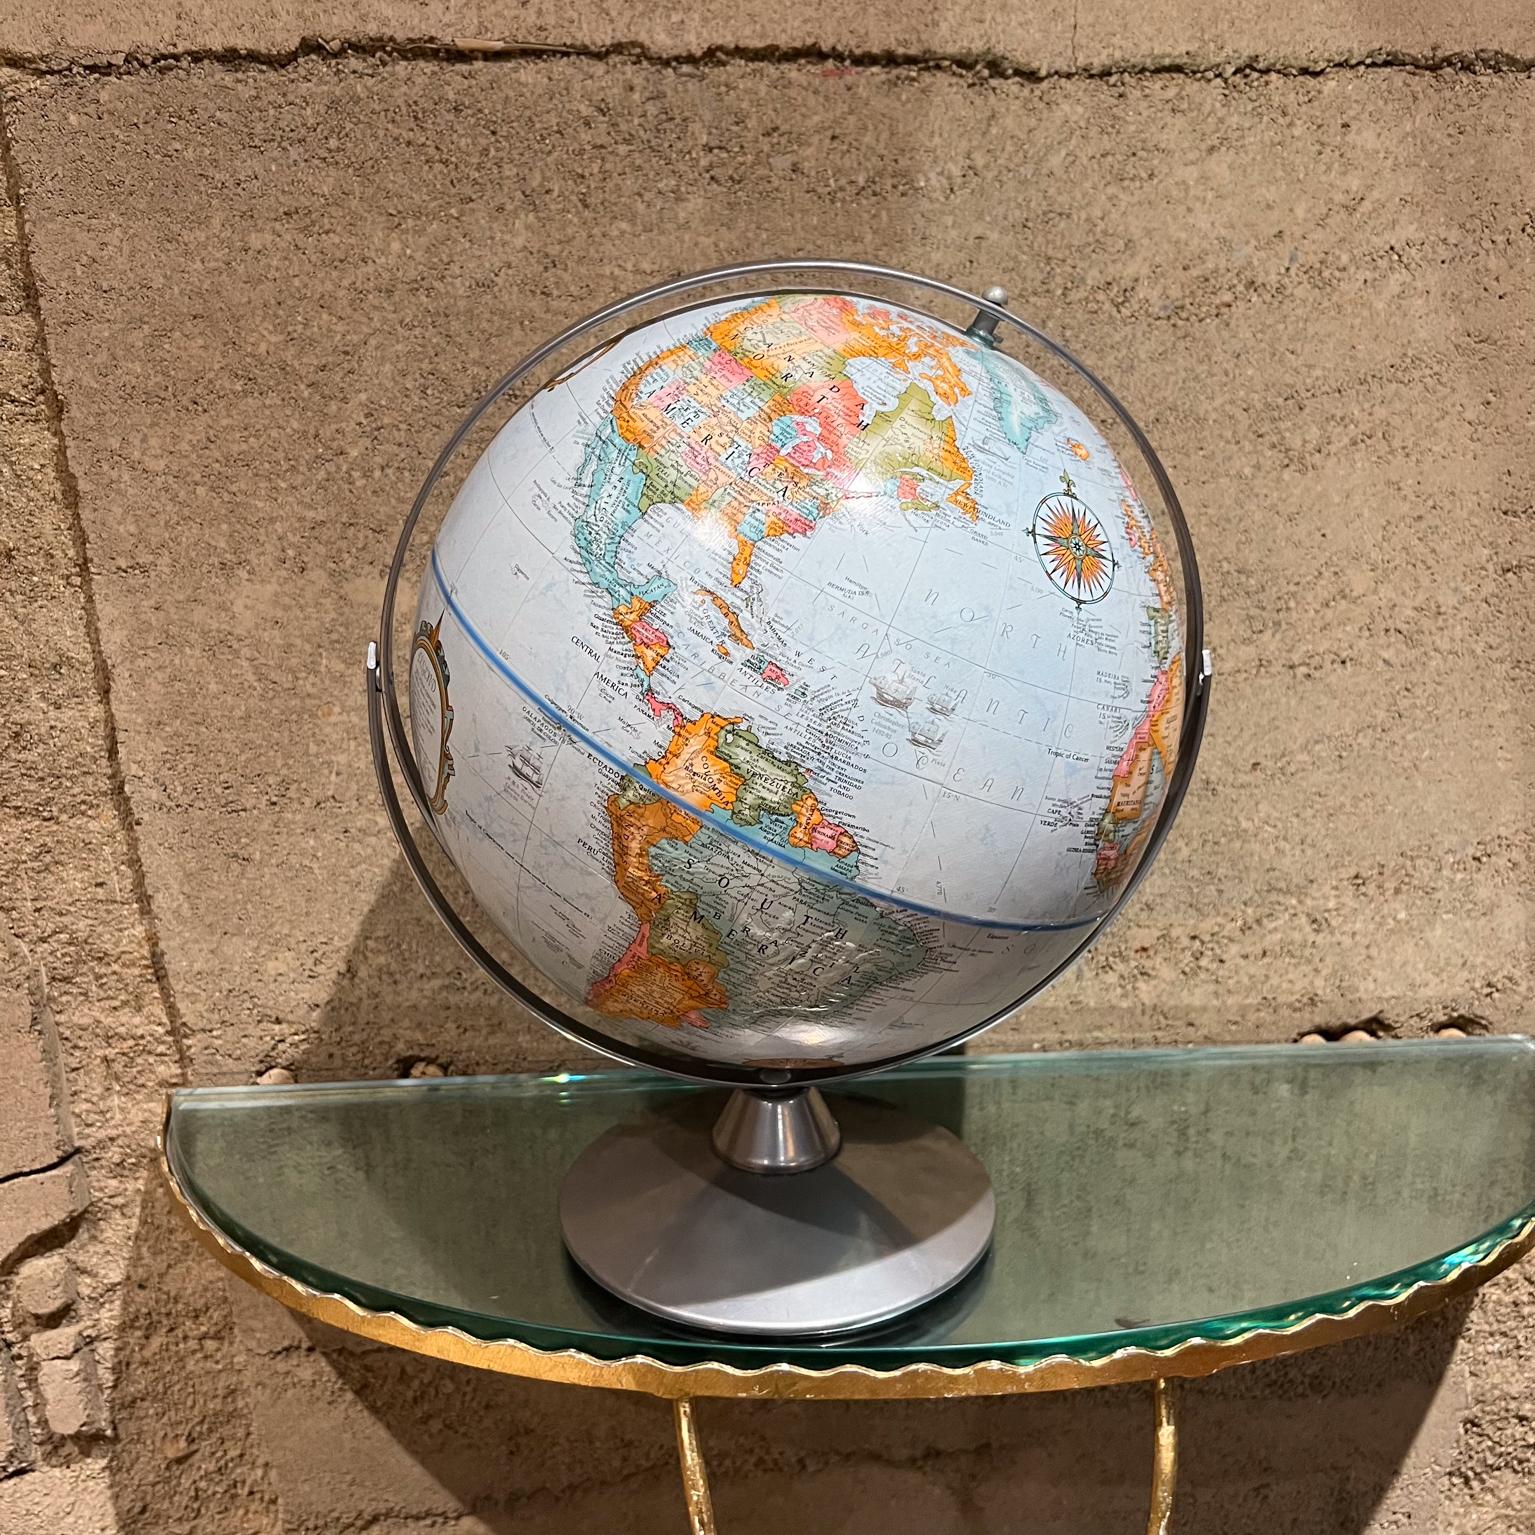 
1960s Replogle Globe World Classic Series
15.5 h x 13.25 w x 11.5 d
made in USA
maker stamp
Preowned original unrestored vintage condition
Refer to images.